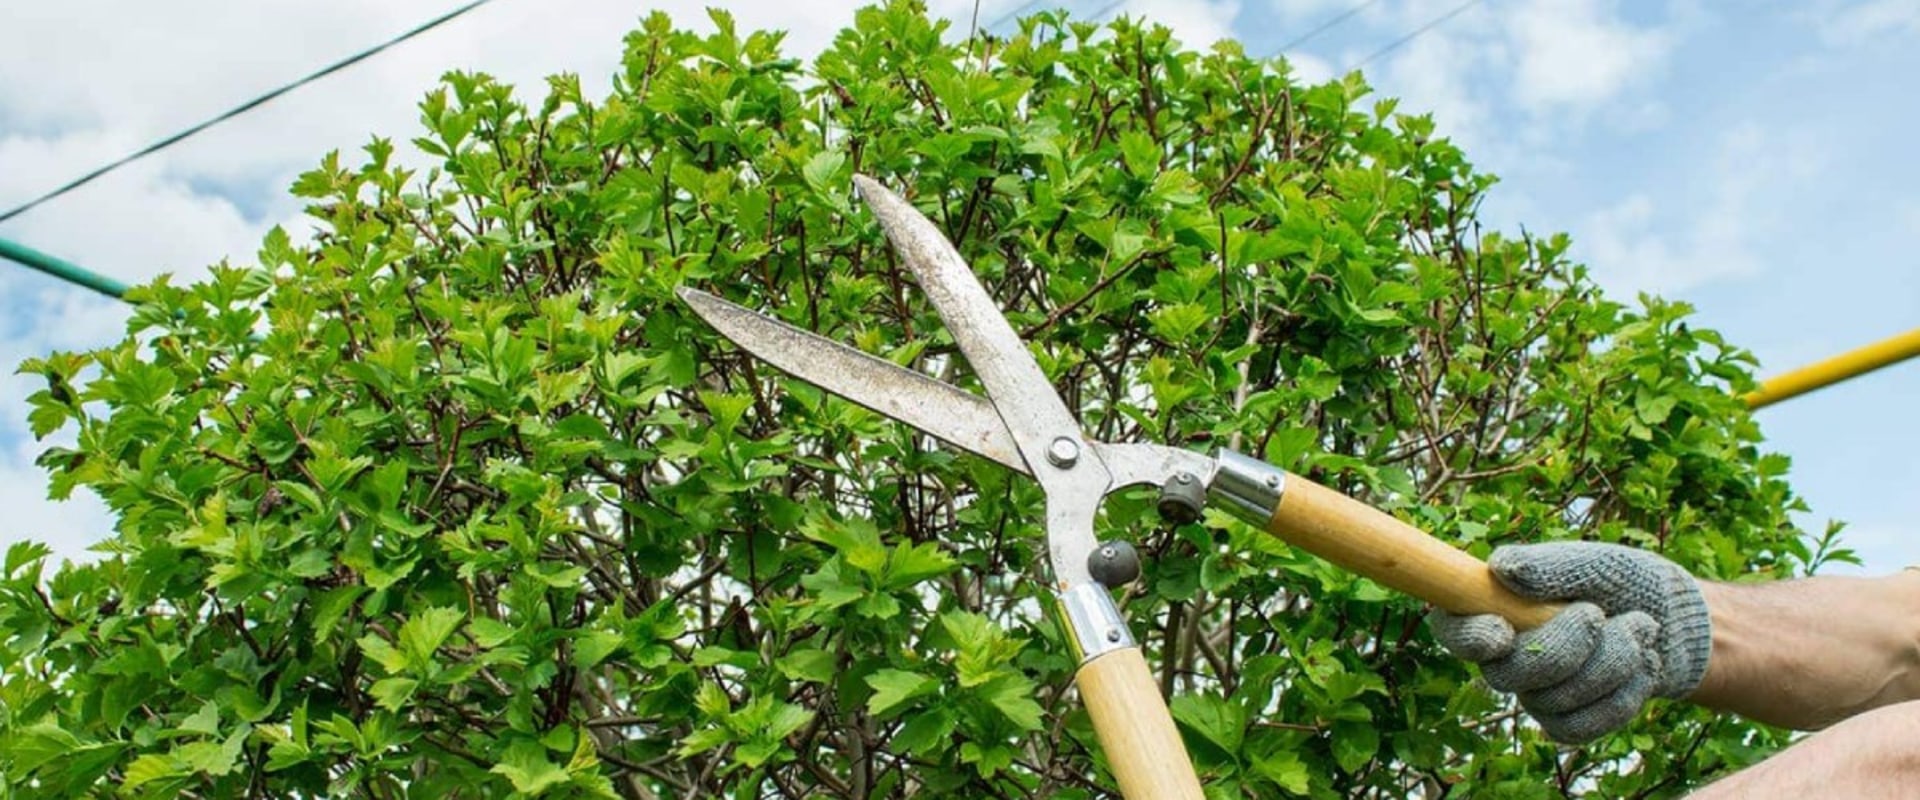 What does pruning a tree do?